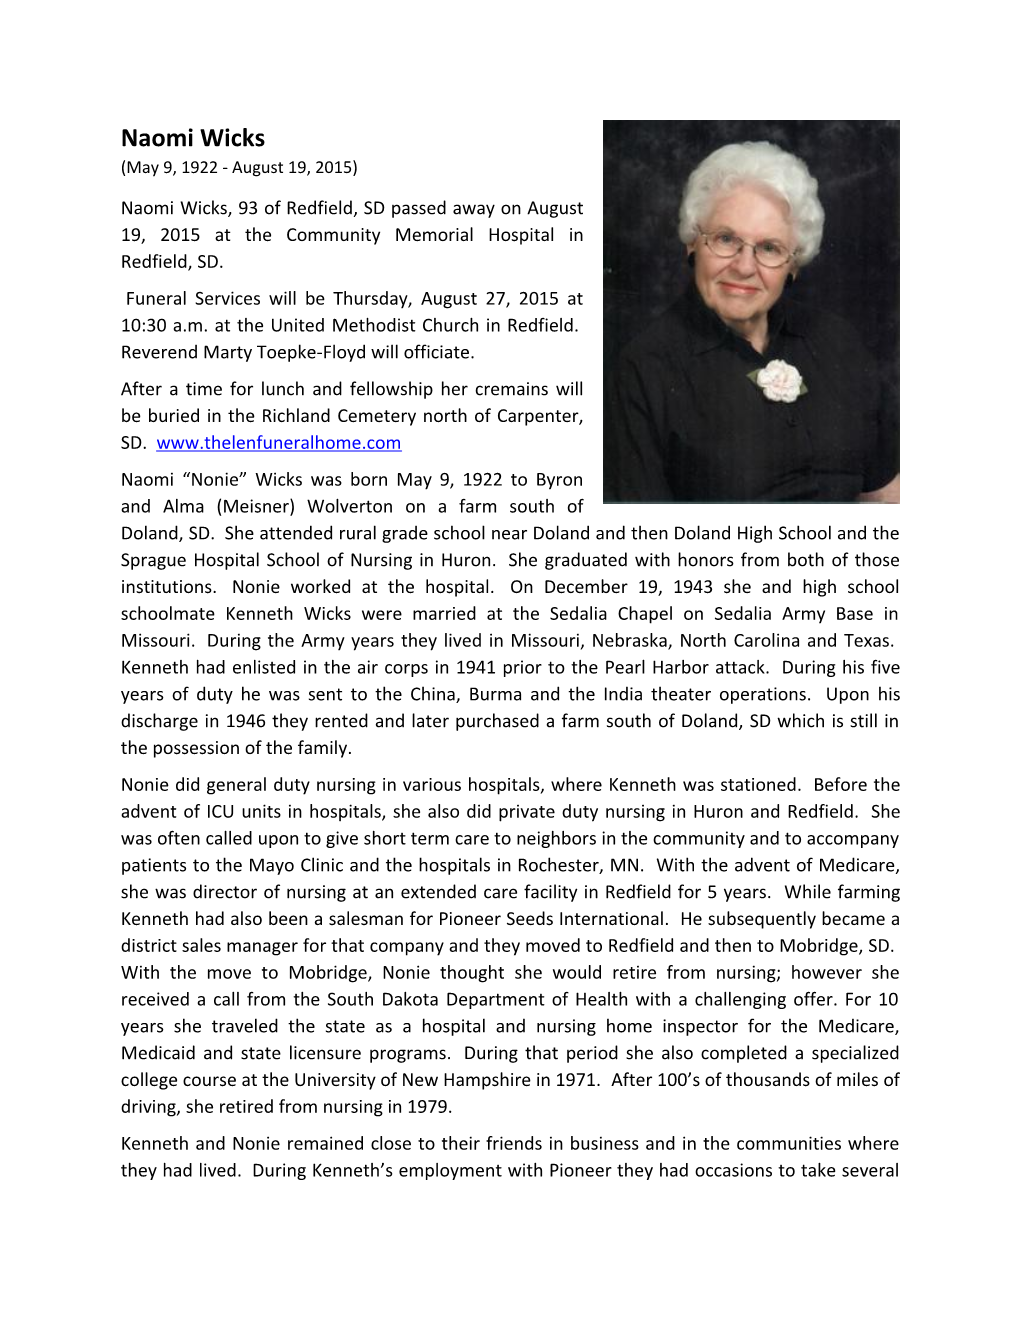 Naomi Wicks, 93 of Redfield, SD Passed Away on August 19, 2015 at the Community Memorial